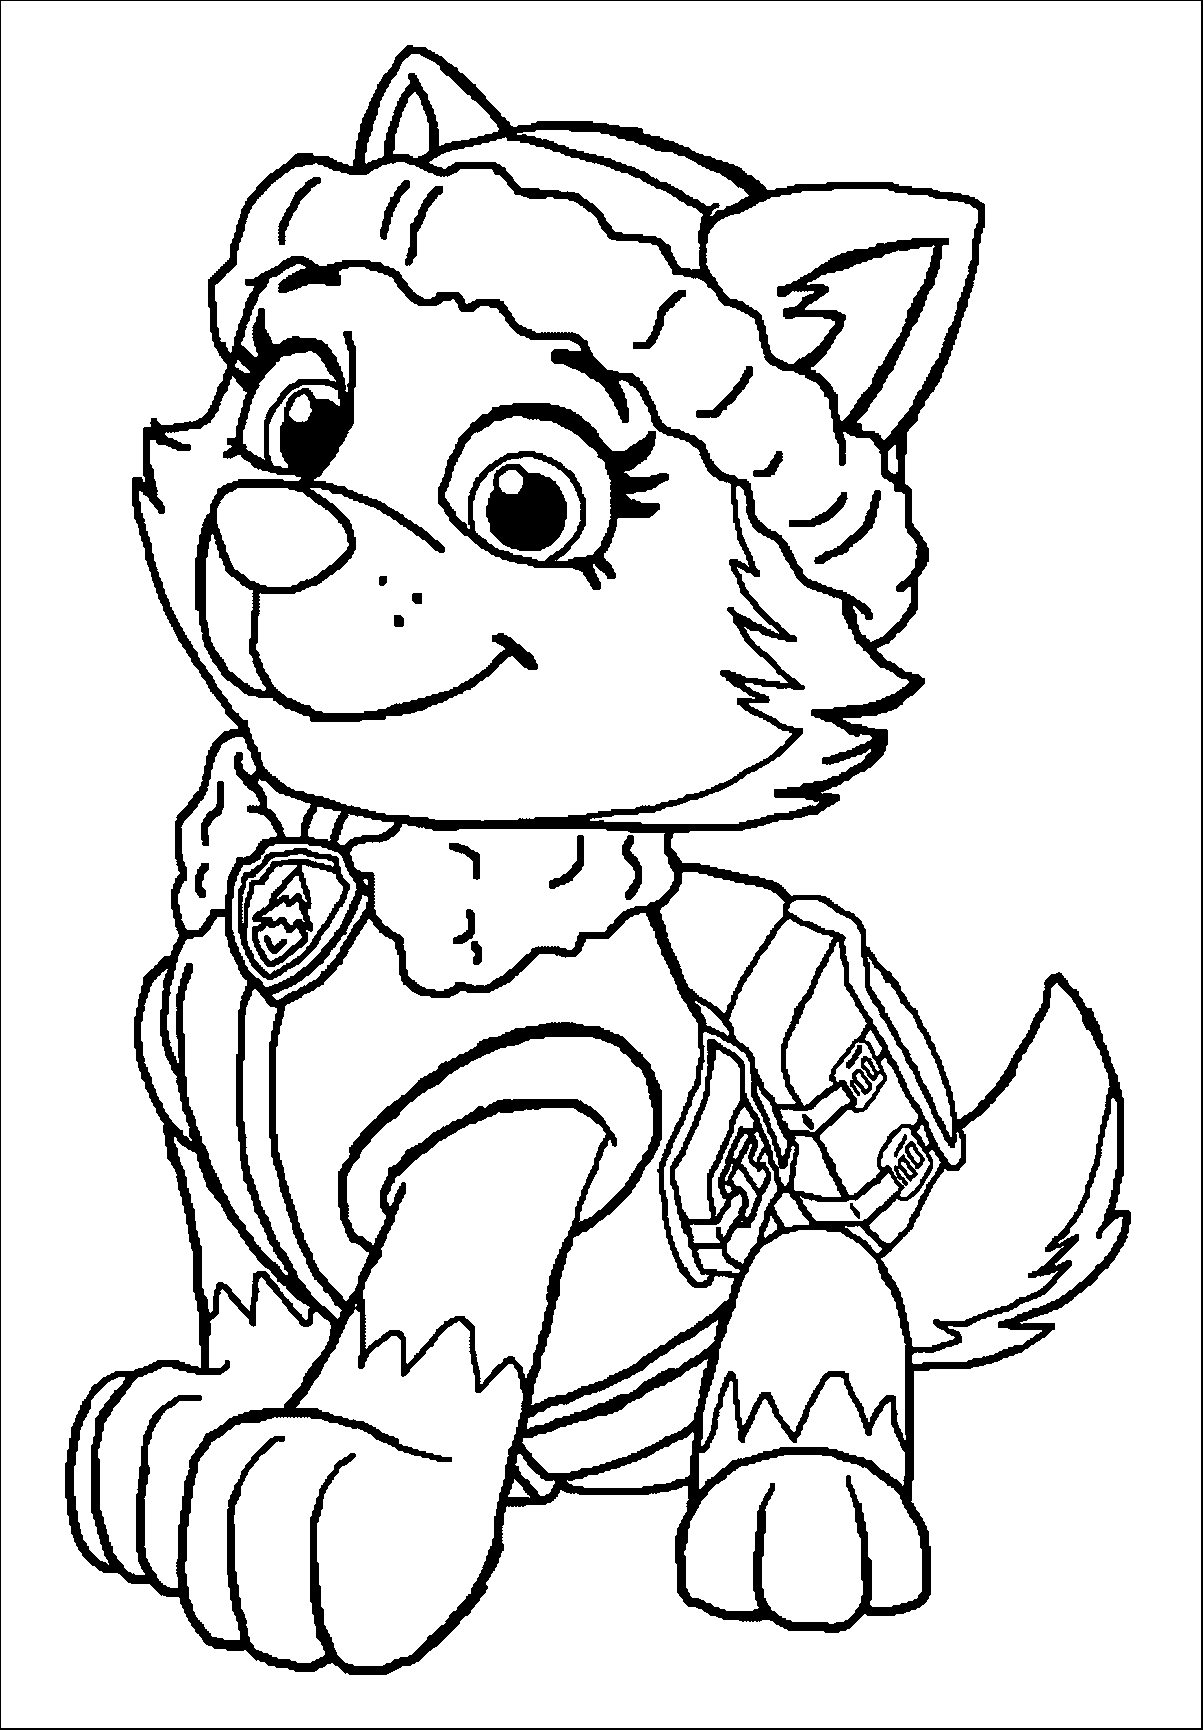 animal-paw-patrol-coloring-pages-free-printable-for-kids-coloring-pages-free